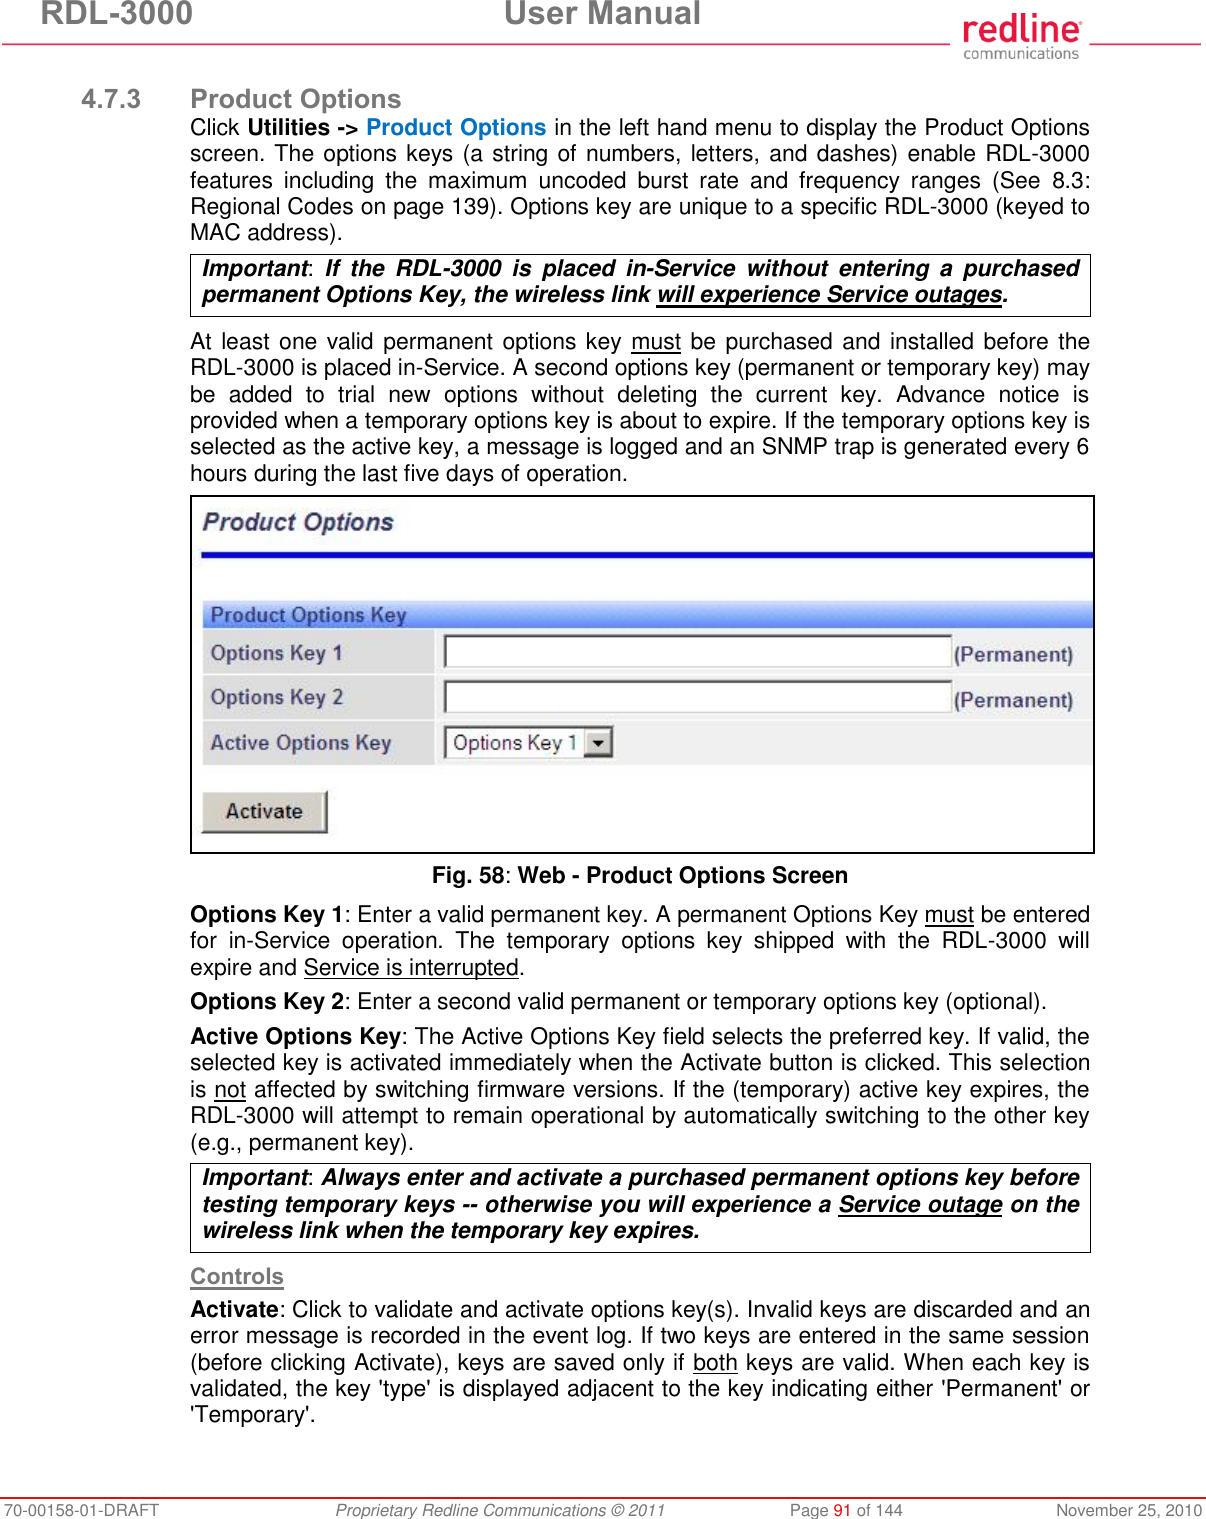 RDL-3000  User Manual 70-00158-01-DRAFT  Proprietary Redline Communications © 2011  Page 91 of 144  November 25, 2010  4.7.3 Product Options Click Utilities -&gt; Product Options in the left hand menu to display the Product Options screen. The options keys (a string of numbers, letters, and dashes) enable RDL-3000 features  including  the  maximum  uncoded  burst  rate  and  frequency  ranges  (See  8.3: Regional Codes on page 139). Options key are unique to a specific RDL-3000 (keyed to MAC address). Important:  If  the  RDL-3000  is  placed  in-Service  without  entering  a  purchased permanent Options Key, the wireless link will experience Service outages.  At least one valid permanent options key must be purchased and installed before the RDL-3000 is placed in-Service. A second options key (permanent or temporary key) may be  added  to  trial  new  options  without  deleting  the  current  key.  Advance  notice  is provided when a temporary options key is about to expire. If the temporary options key is selected as the active key, a message is logged and an SNMP trap is generated every 6 hours during the last five days of operation.  Fig. 58: Web - Product Options Screen Options Key 1: Enter a valid permanent key. A permanent Options Key must be entered for  in-Service  operation.  The  temporary  options  key  shipped  with  the  RDL-3000  will expire and Service is interrupted.  Options Key 2: Enter a second valid permanent or temporary options key (optional). Active Options Key: The Active Options Key field selects the preferred key. If valid, the selected key is activated immediately when the Activate button is clicked. This selection is not affected by switching firmware versions. If the (temporary) active key expires, the RDL-3000 will attempt to remain operational by automatically switching to the other key (e.g., permanent key). Important: Always enter and activate a purchased permanent options key before testing temporary keys -- otherwise you will experience a Service outage on the wireless link when the temporary key expires.  Controls Activate: Click to validate and activate options key(s). Invalid keys are discarded and an error message is recorded in the event log. If two keys are entered in the same session (before clicking Activate), keys are saved only if both keys are valid. When each key is validated, the key &apos;type&apos; is displayed adjacent to the key indicating either &apos;Permanent&apos; or &apos;Temporary&apos;. 